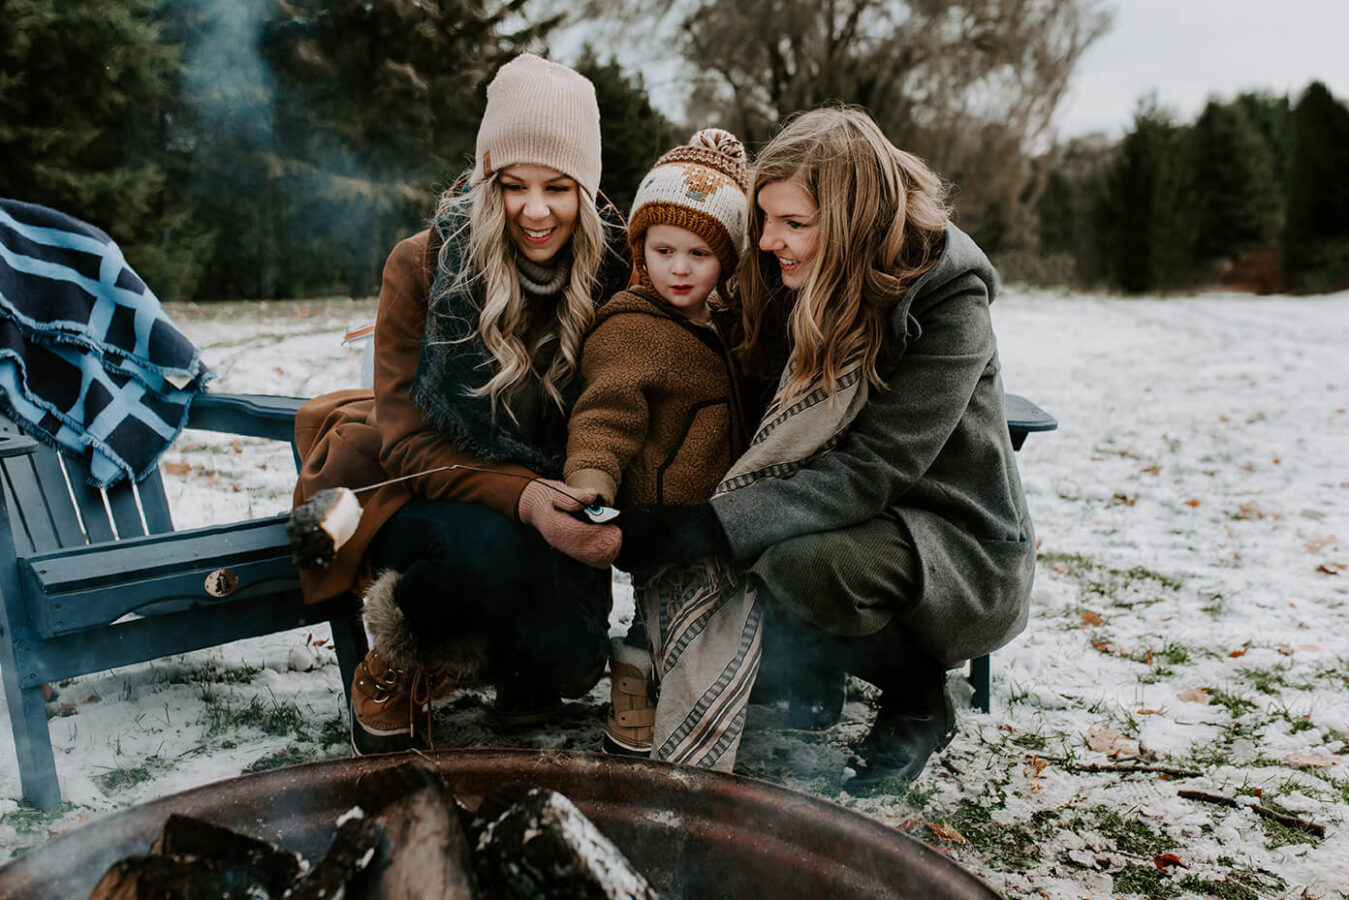 Two women and a toddler roasting marshmallows around a fire pit